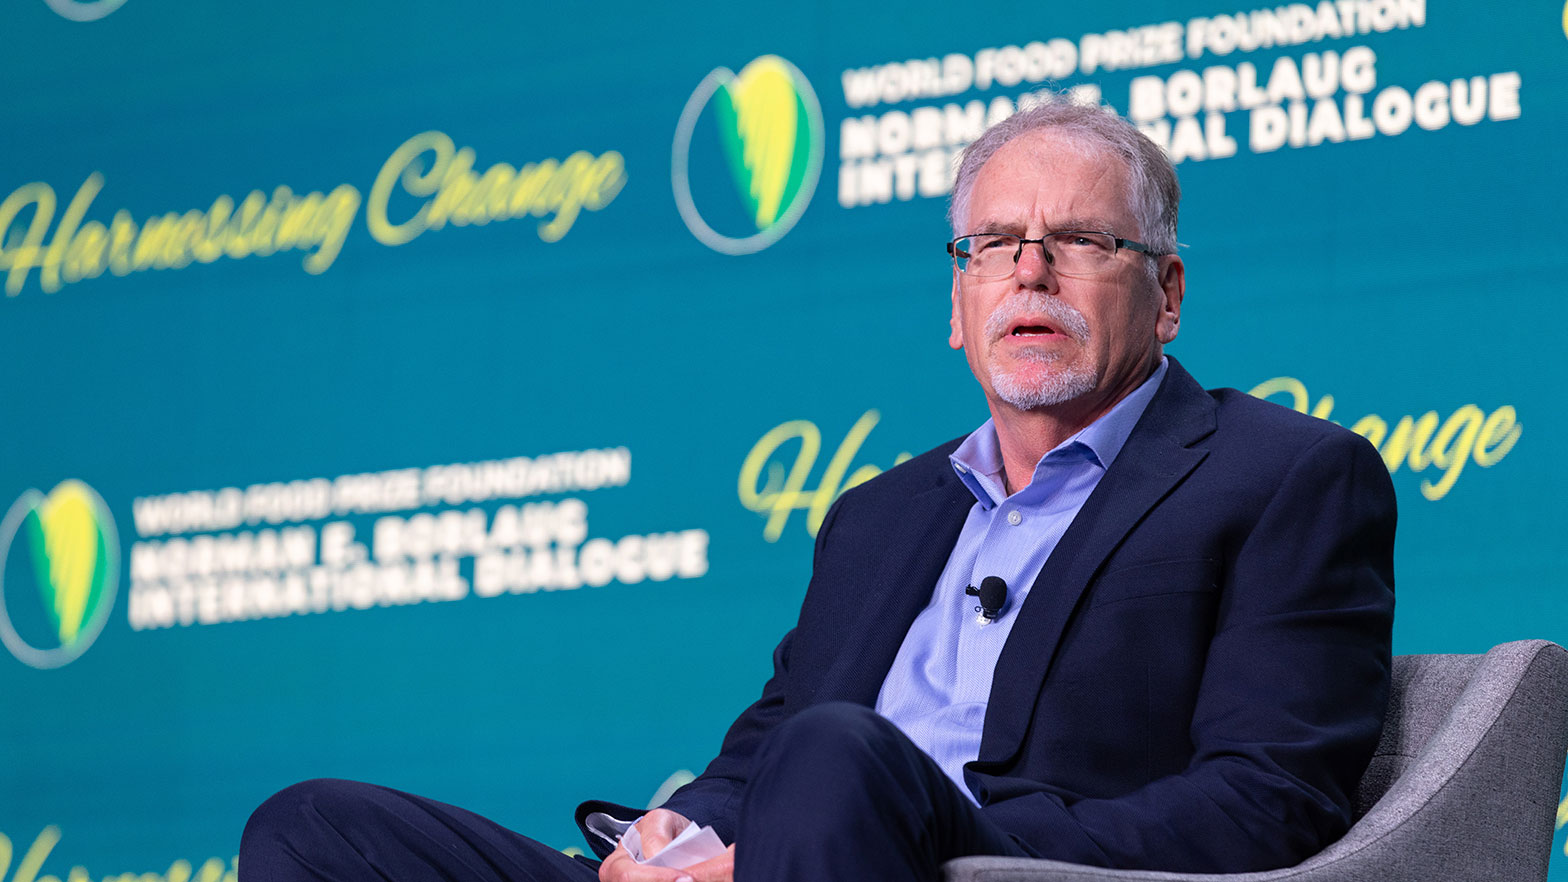 Chevron REG President Kevin Lucke participated in the panel discussion “Food and Fuel: Where Agriculture, Energy, and Food Security Intersect” at a recent World Food Prize Foundation event.